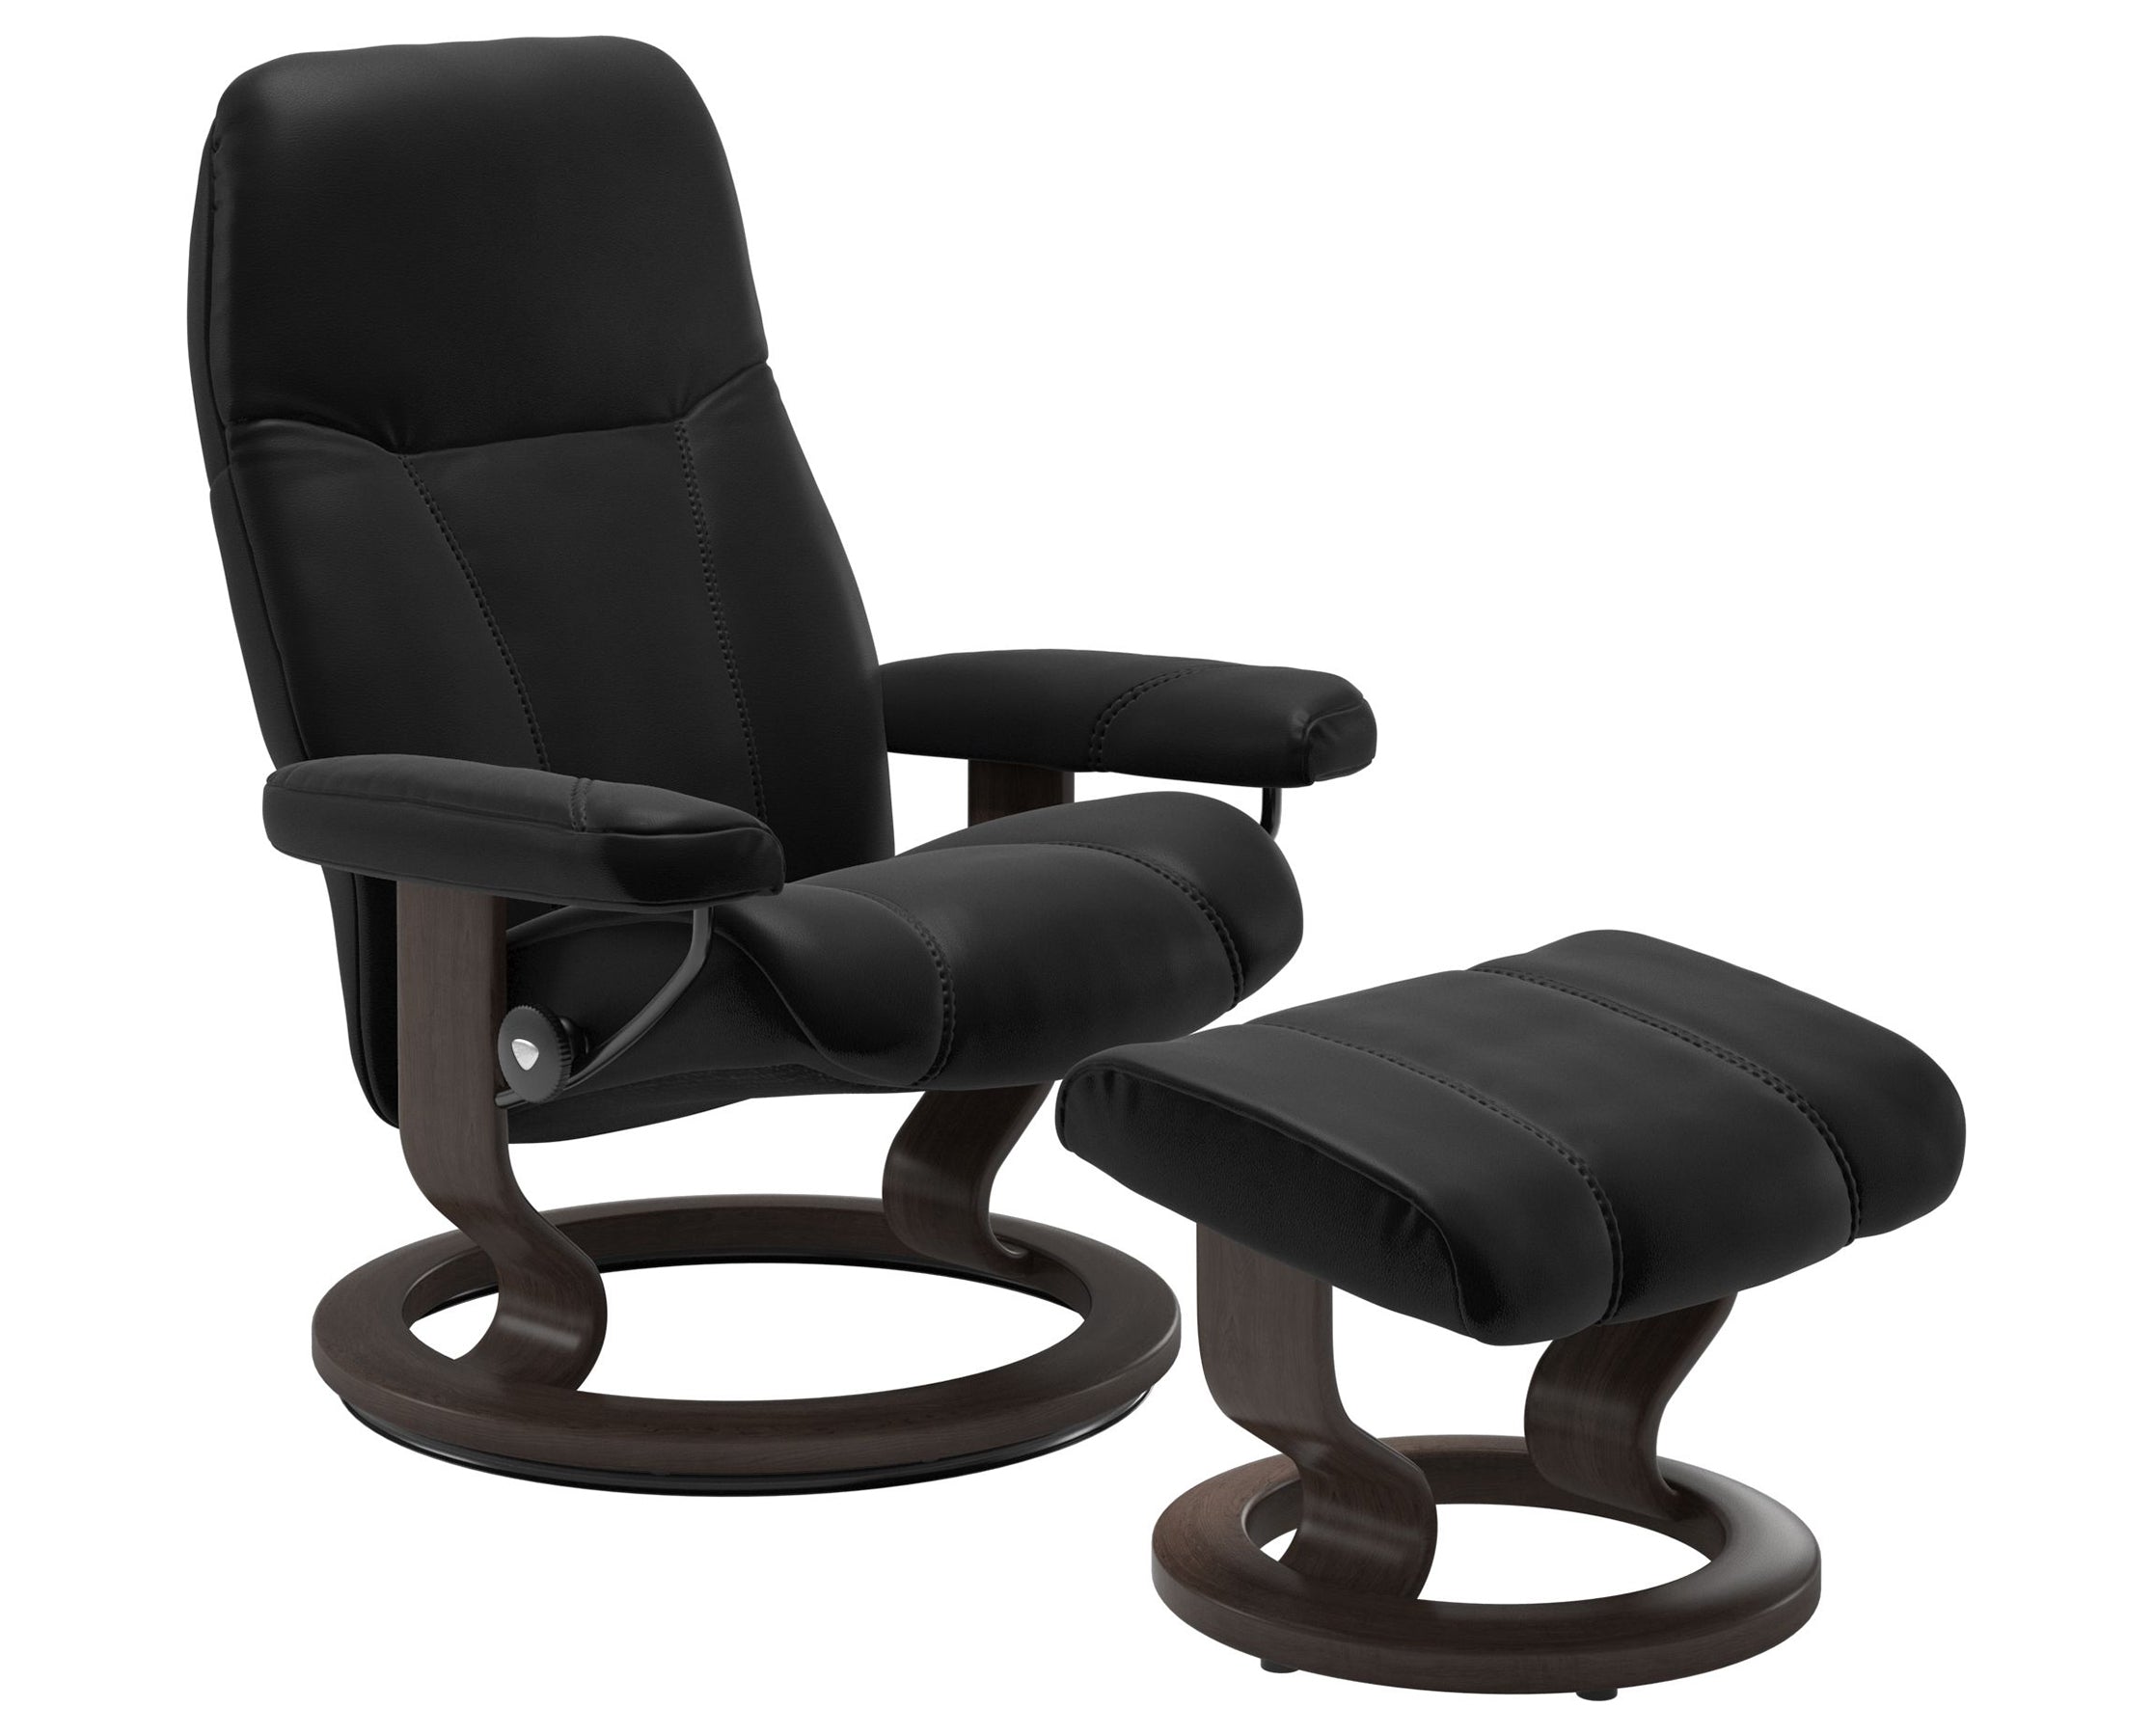 Batick Leather Black S/M/L and Wenge Base | Stressless Consul Classic Recliner | Valley Ridge Furniture